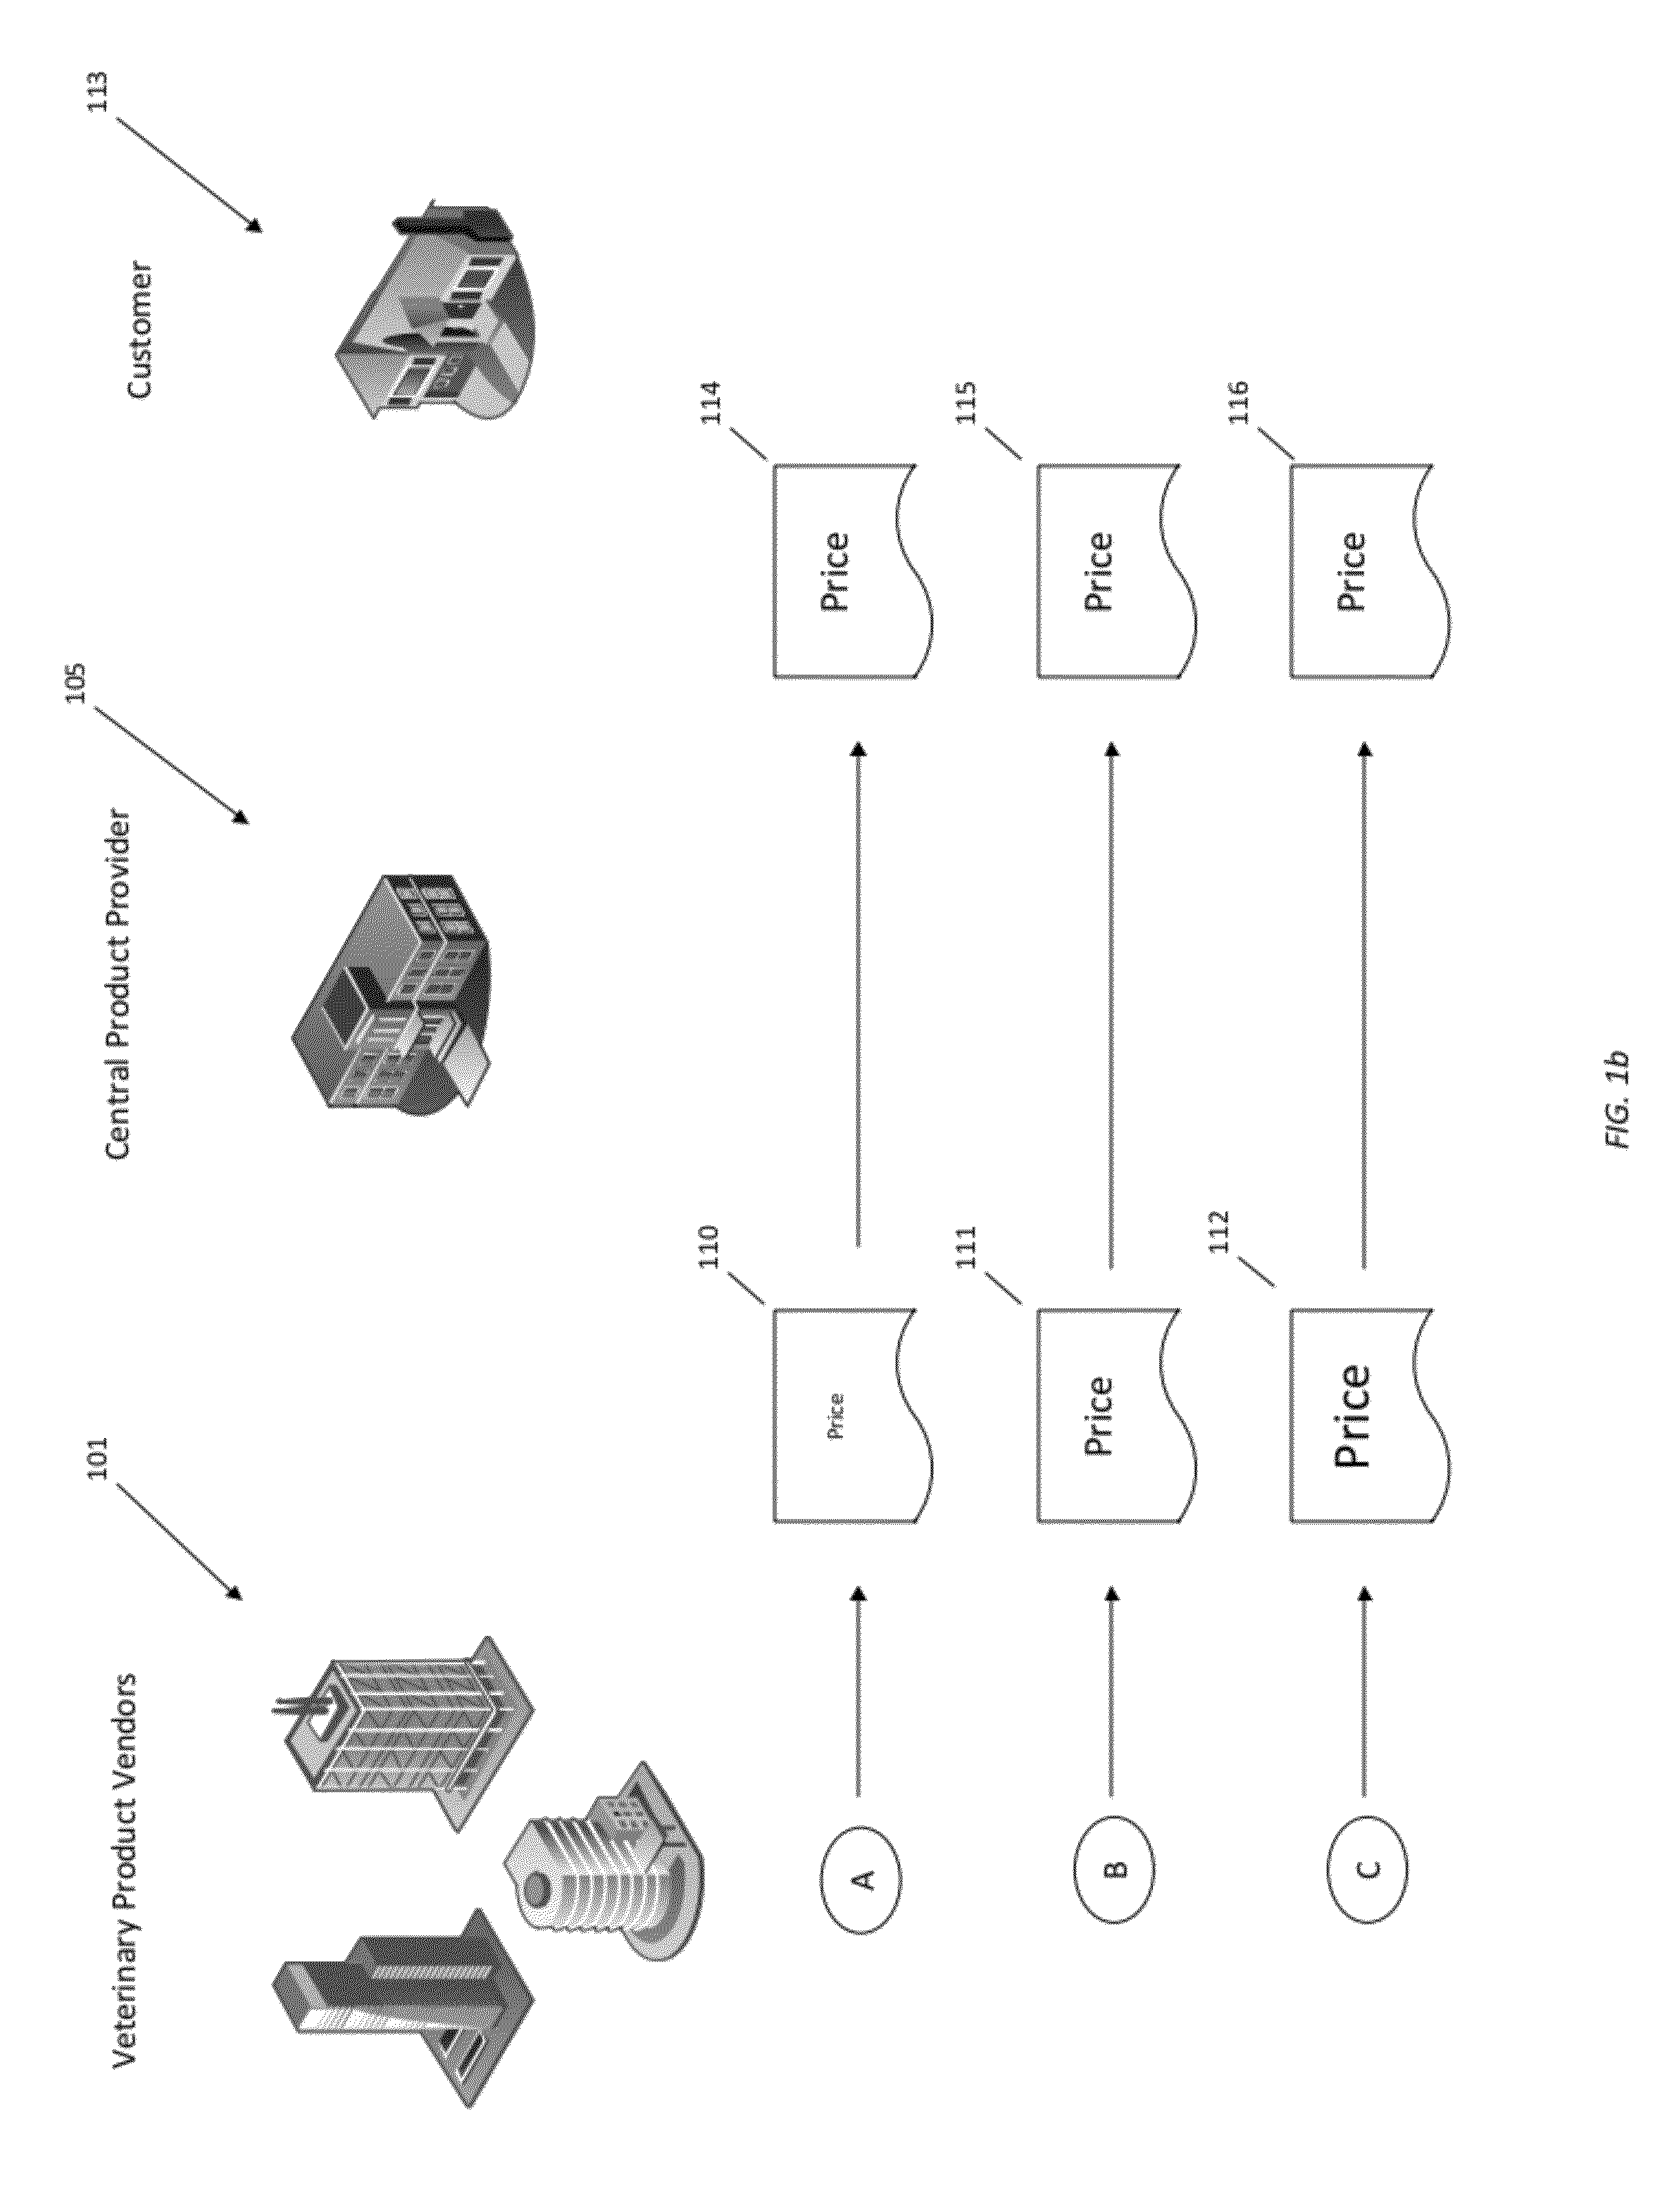 Computer-enabled method and system for automated allocation and distribution of proceeds for sale of veterinary products